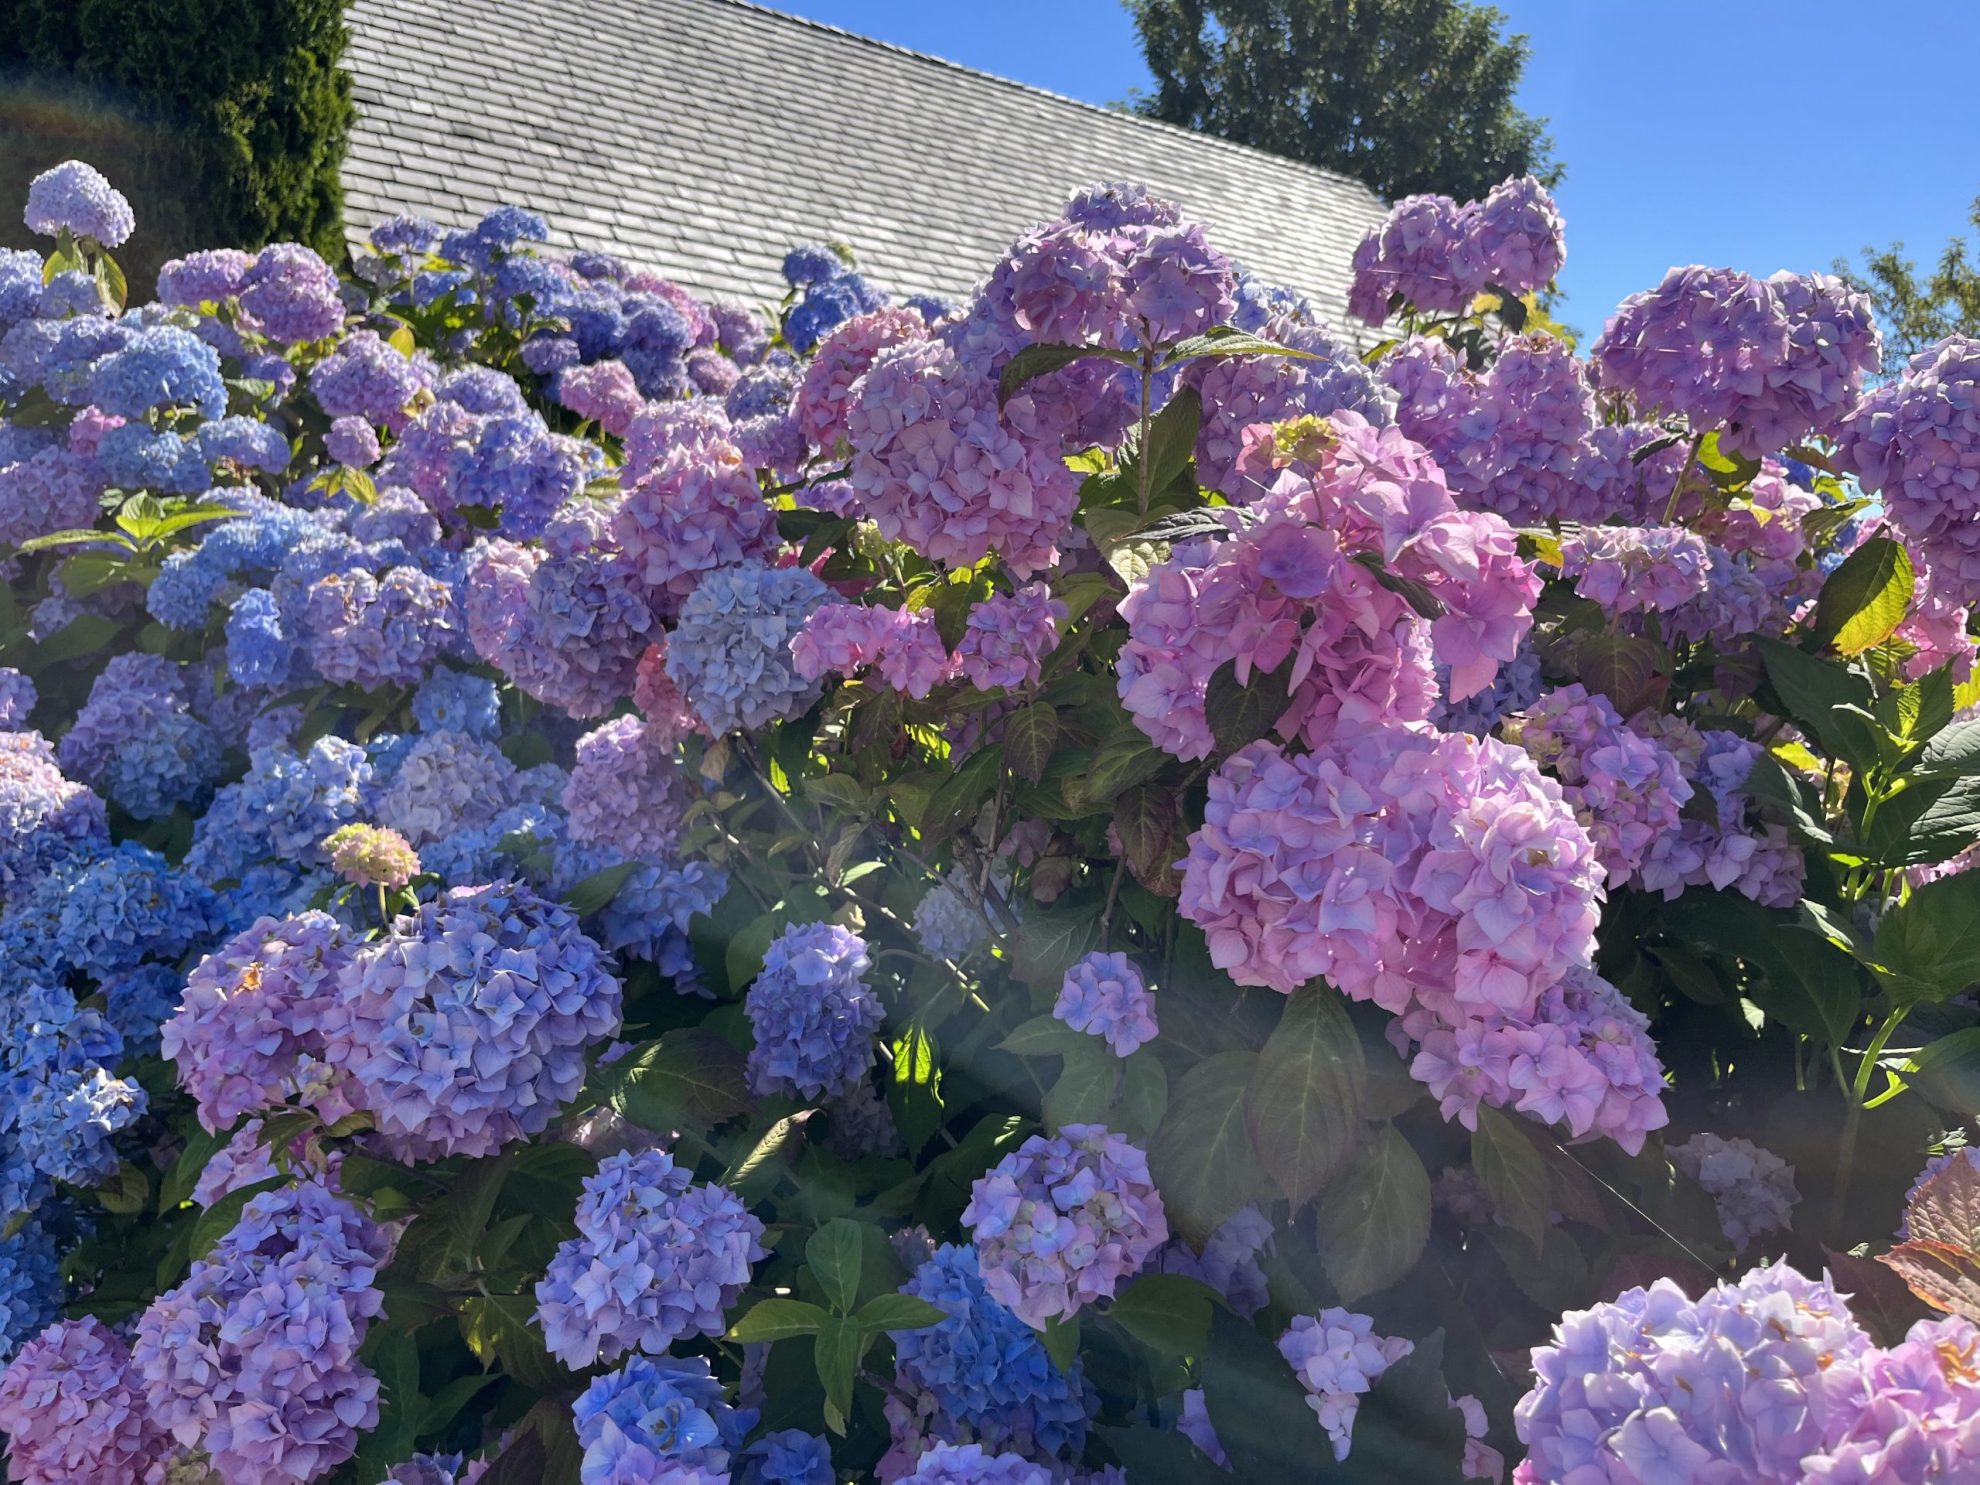 Hydrangea flowers in shades of purple, pink and blue